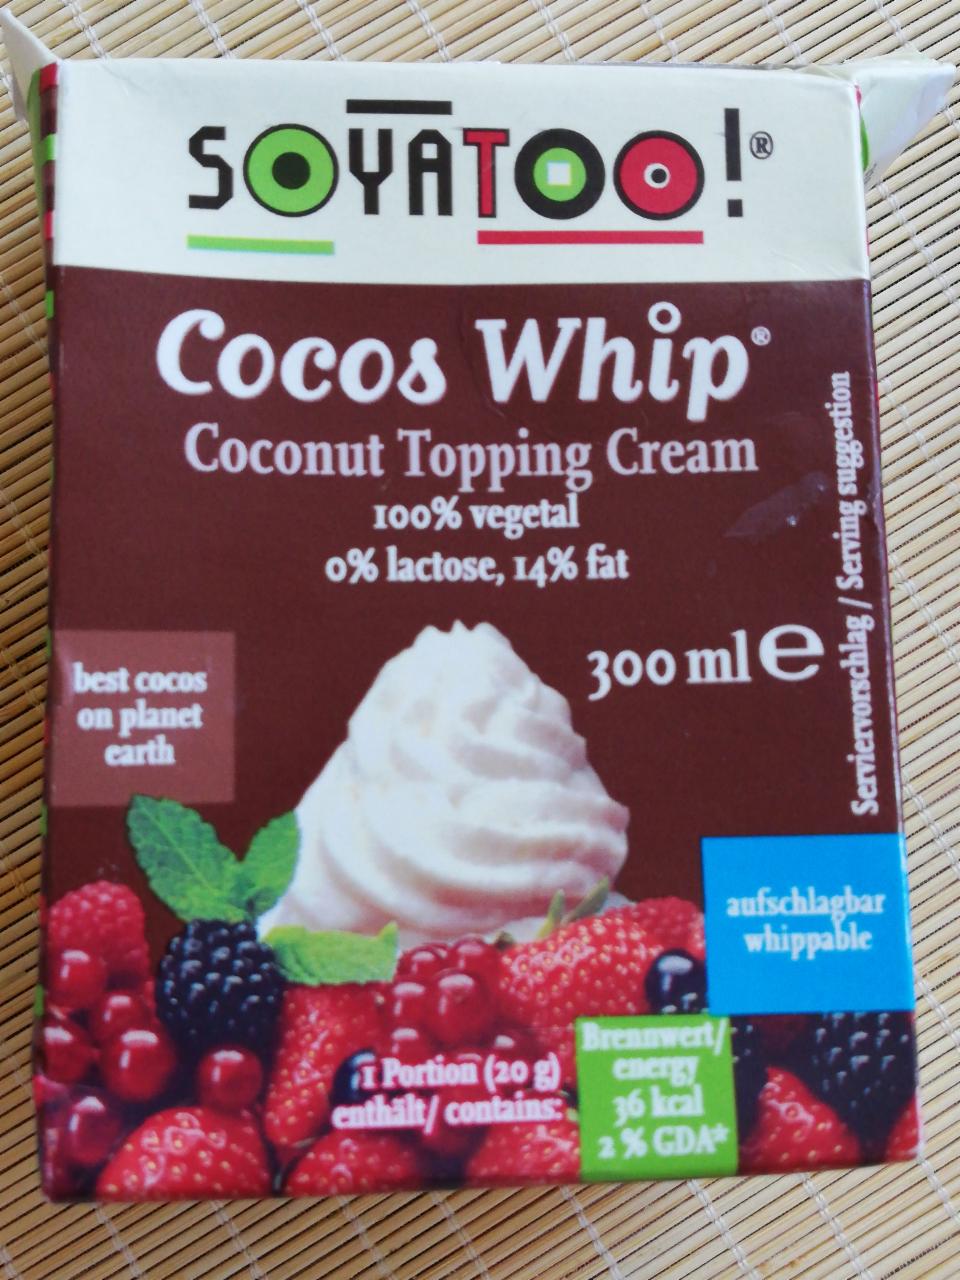 Fotografie - Cocos whip Soyatoo!